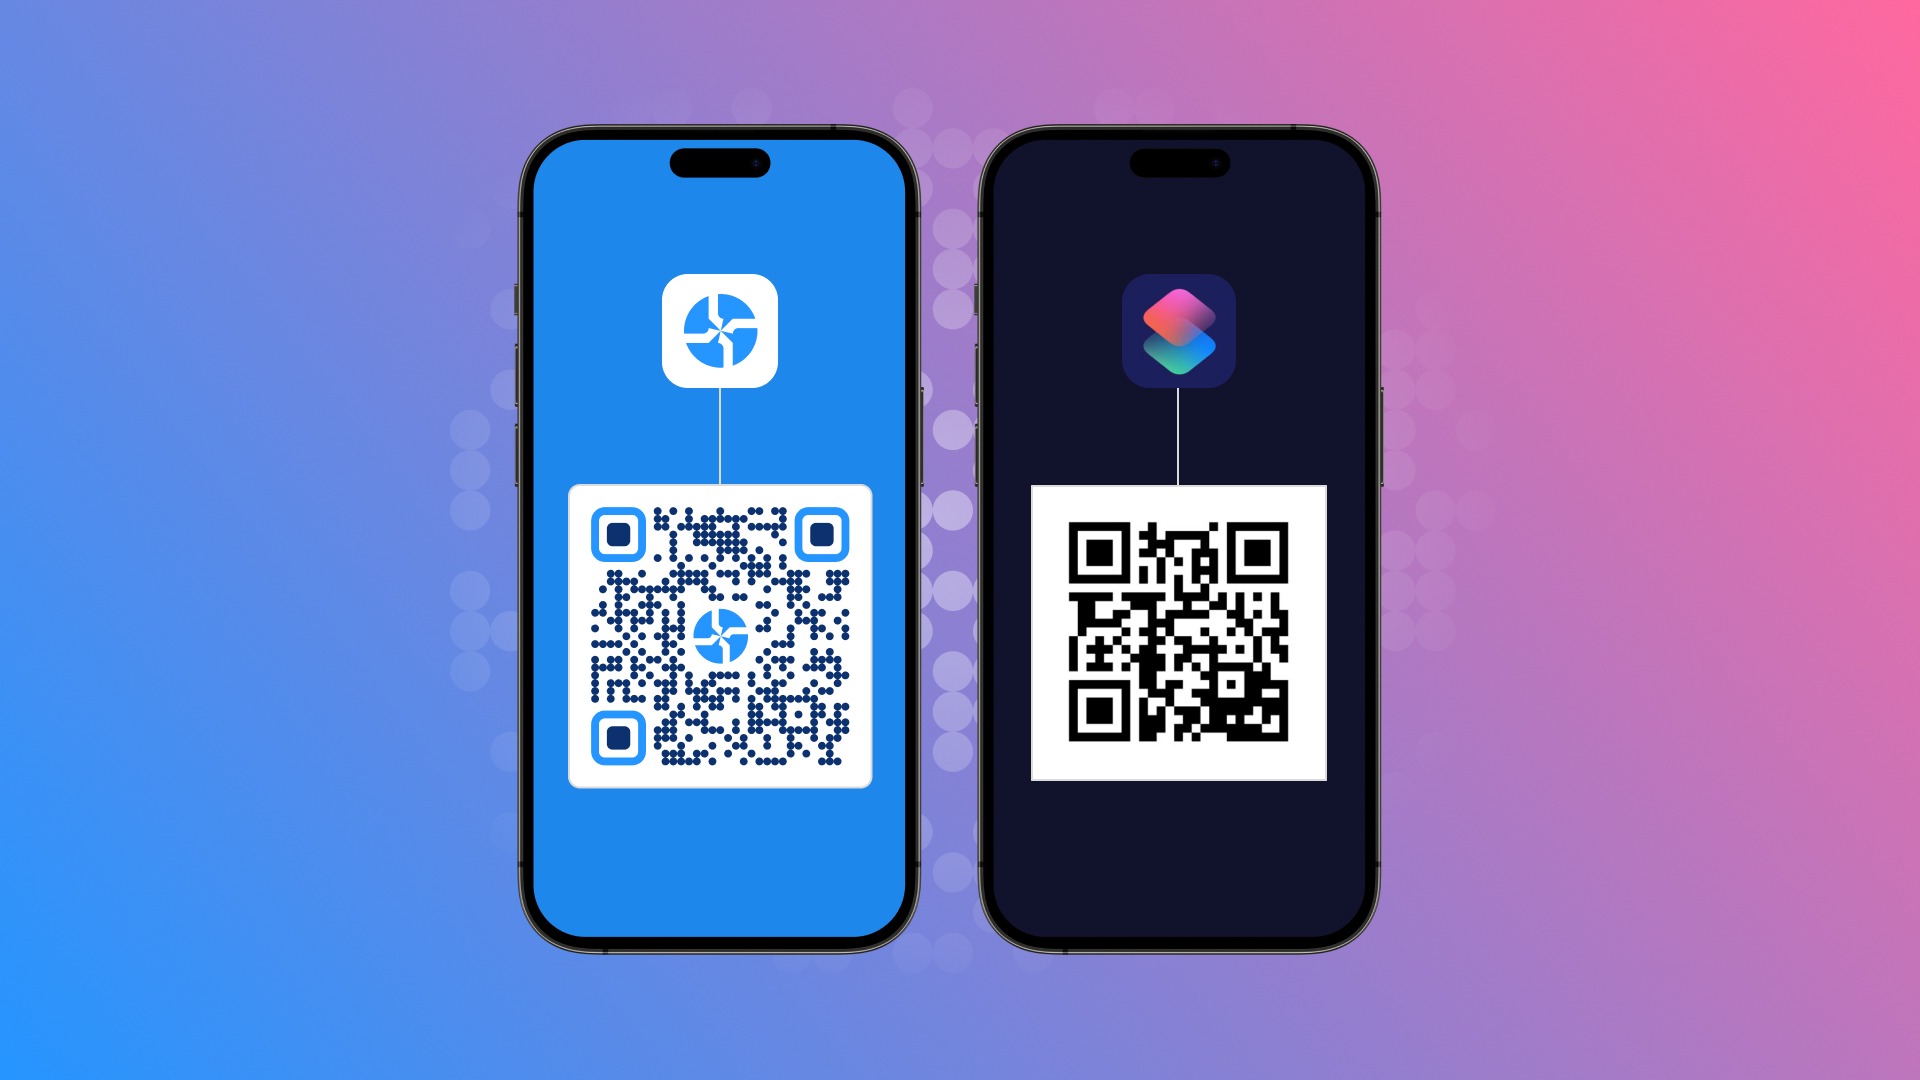 How to Make a QR Code on iPhone [Without an App]